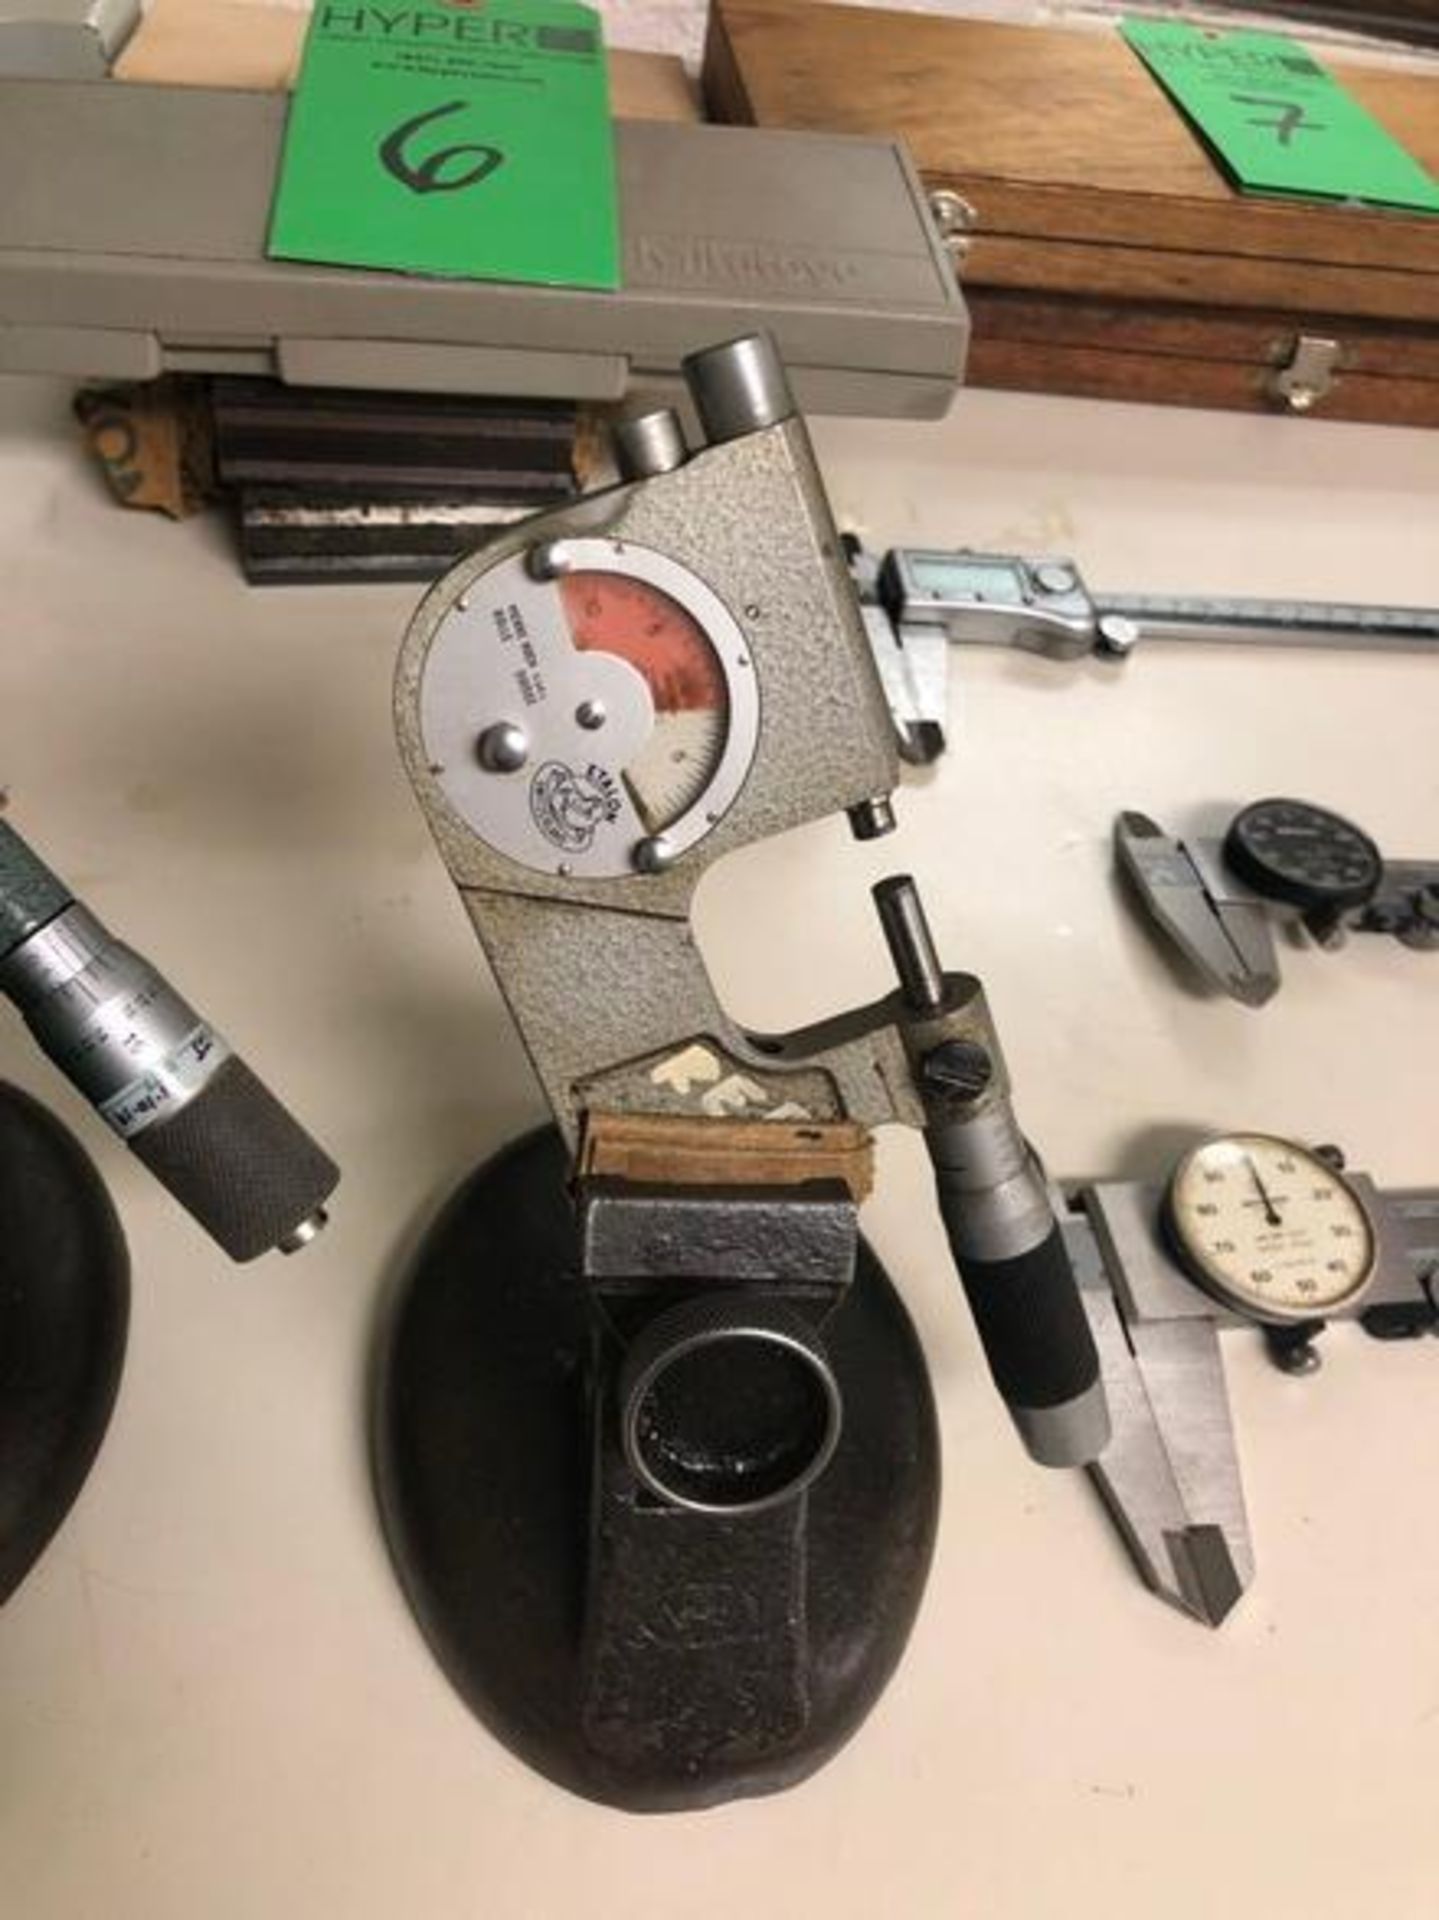 Assorted Test Equipment c/o: Mitutoyo Indicator Micrometer 0-1" w/Retractable Anvil - Image 4 of 7